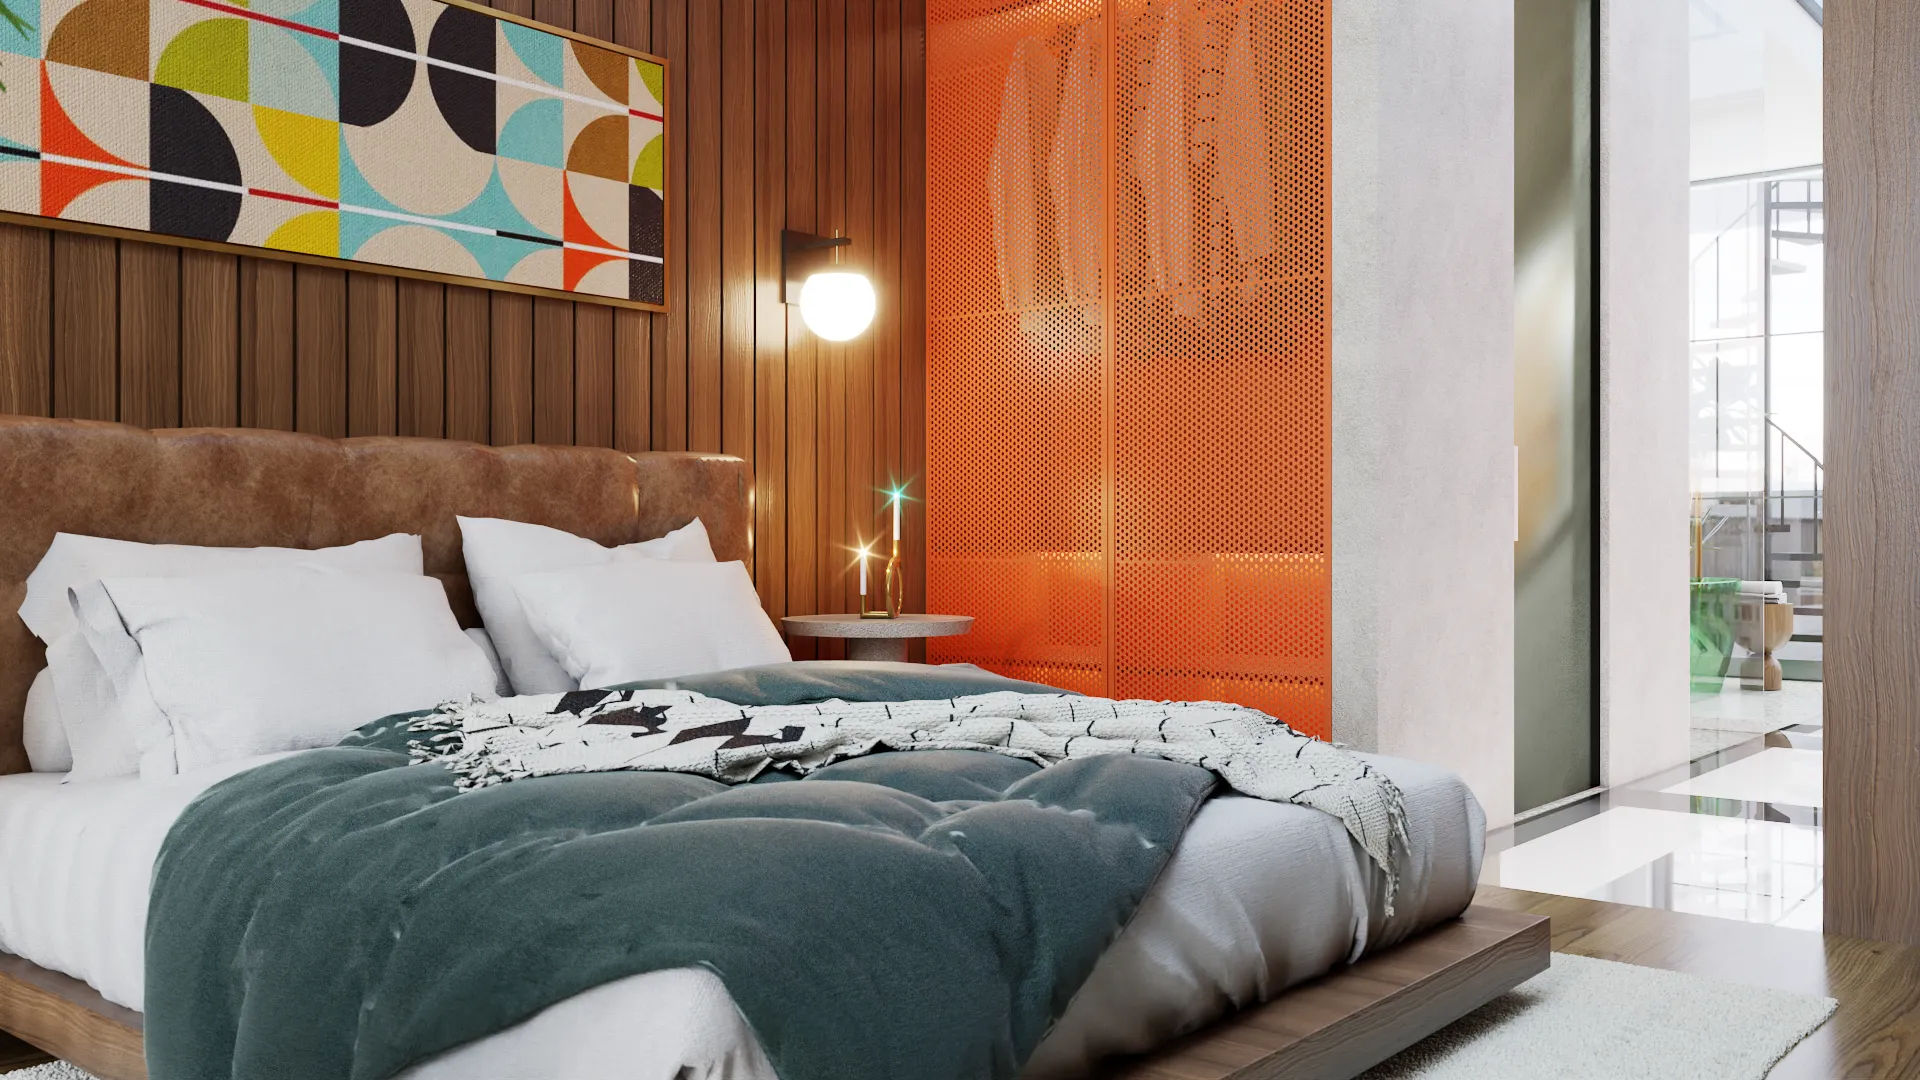 Vibrant bedroom with colorful abstract wall art, wooden accents, and a modern aesthetic, creating an energetic and inviting space. Design by Debora, an online interior design service.